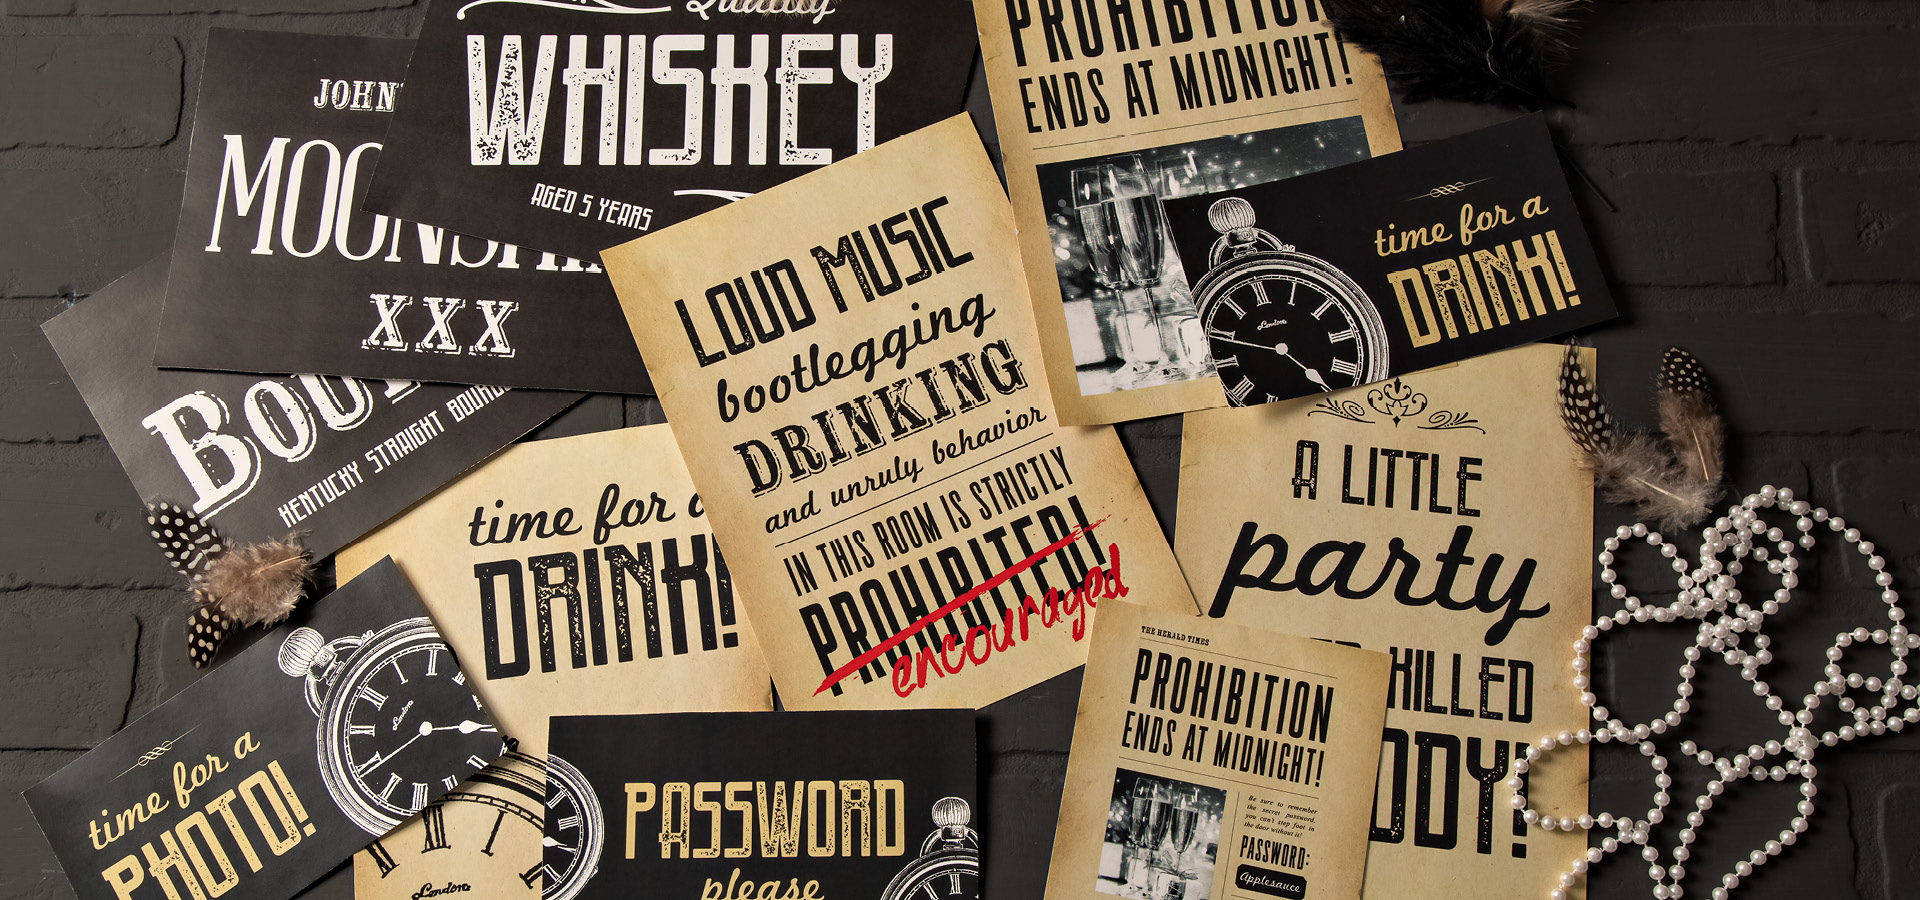 prohibition-posters